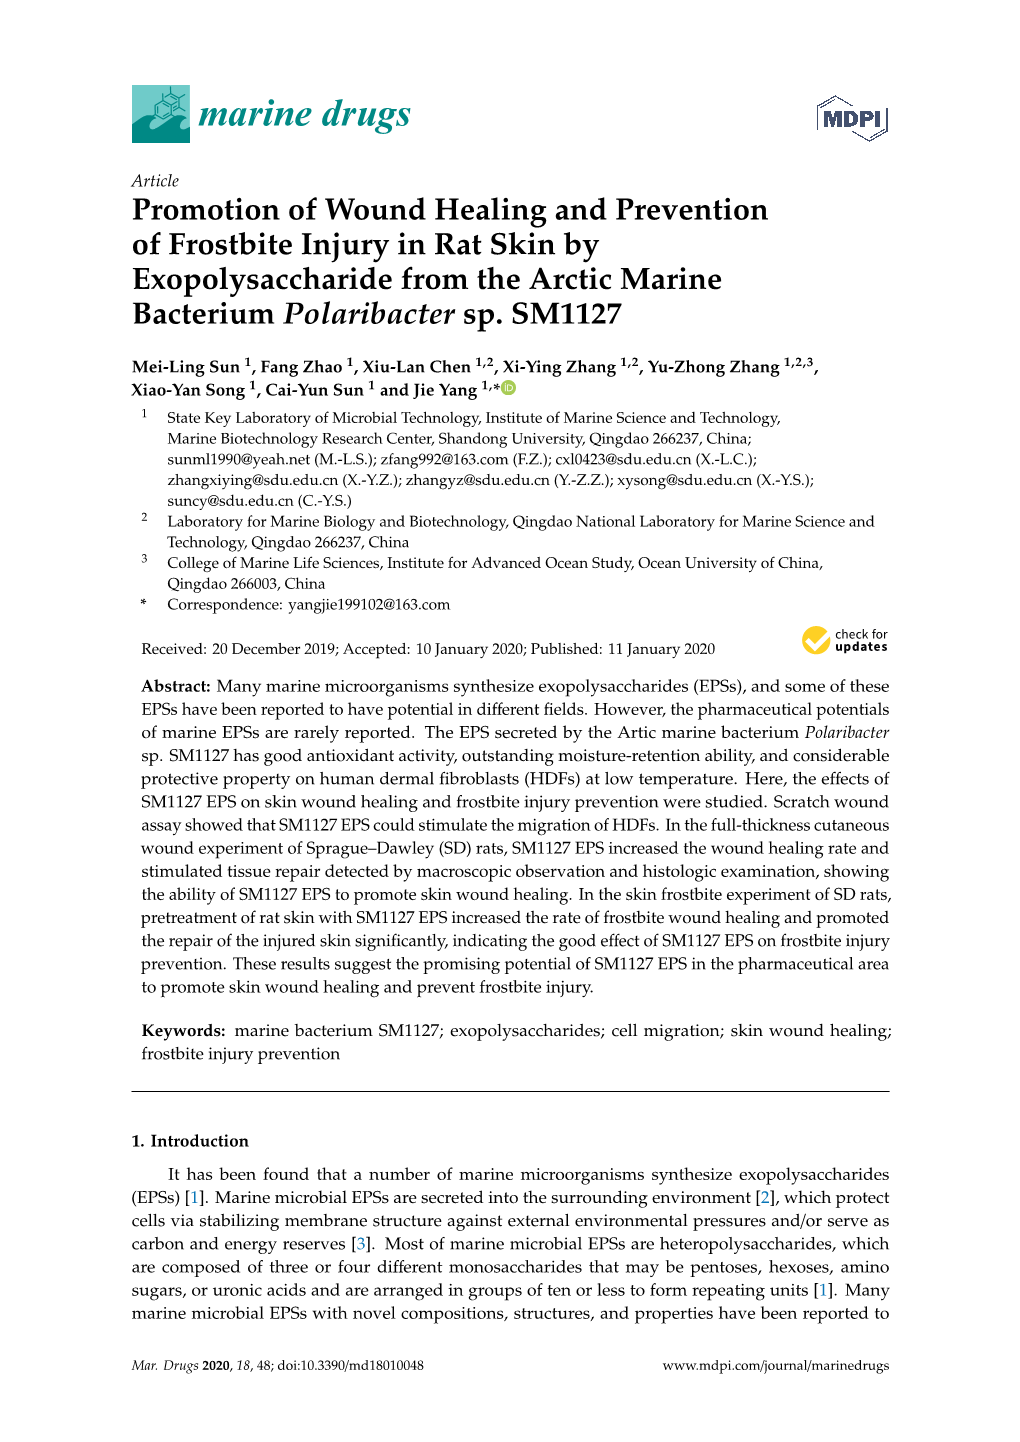 Promotion of Wound Healing and Prevention of Frostbite Injury in Rat Skin by Exopolysaccharide from the Arctic Marine Bacterium Polaribacter Sp